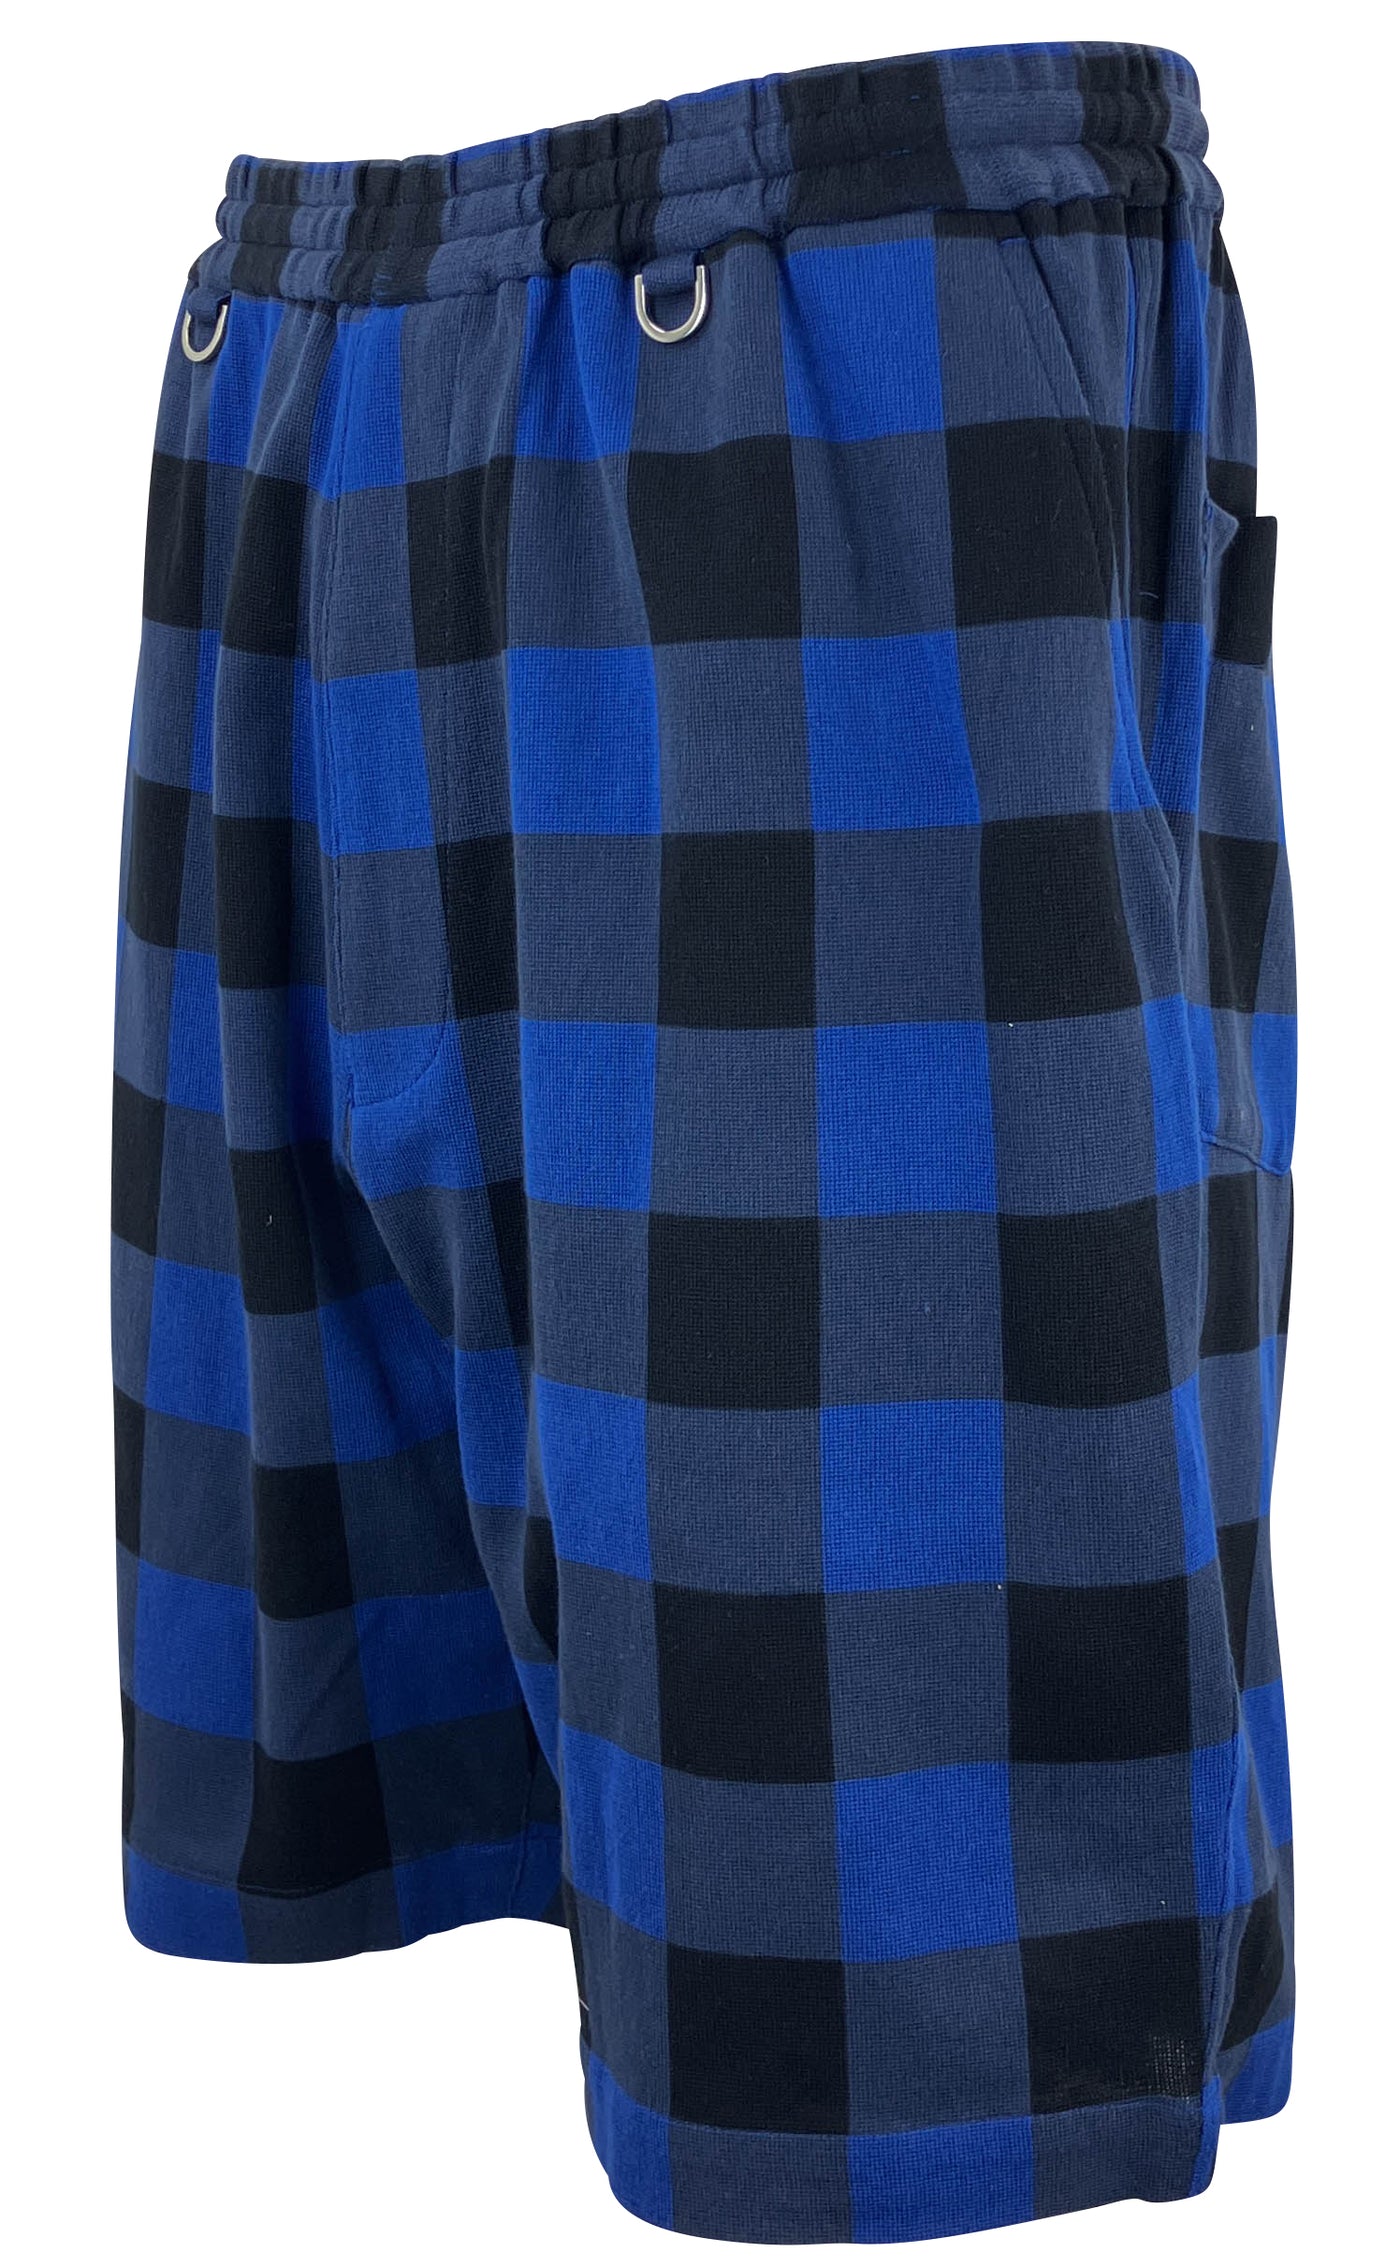 Mastermind Homme x A-Girl's Checkered Shorts in Blue/Black - Discounts on Mastermind at UAL